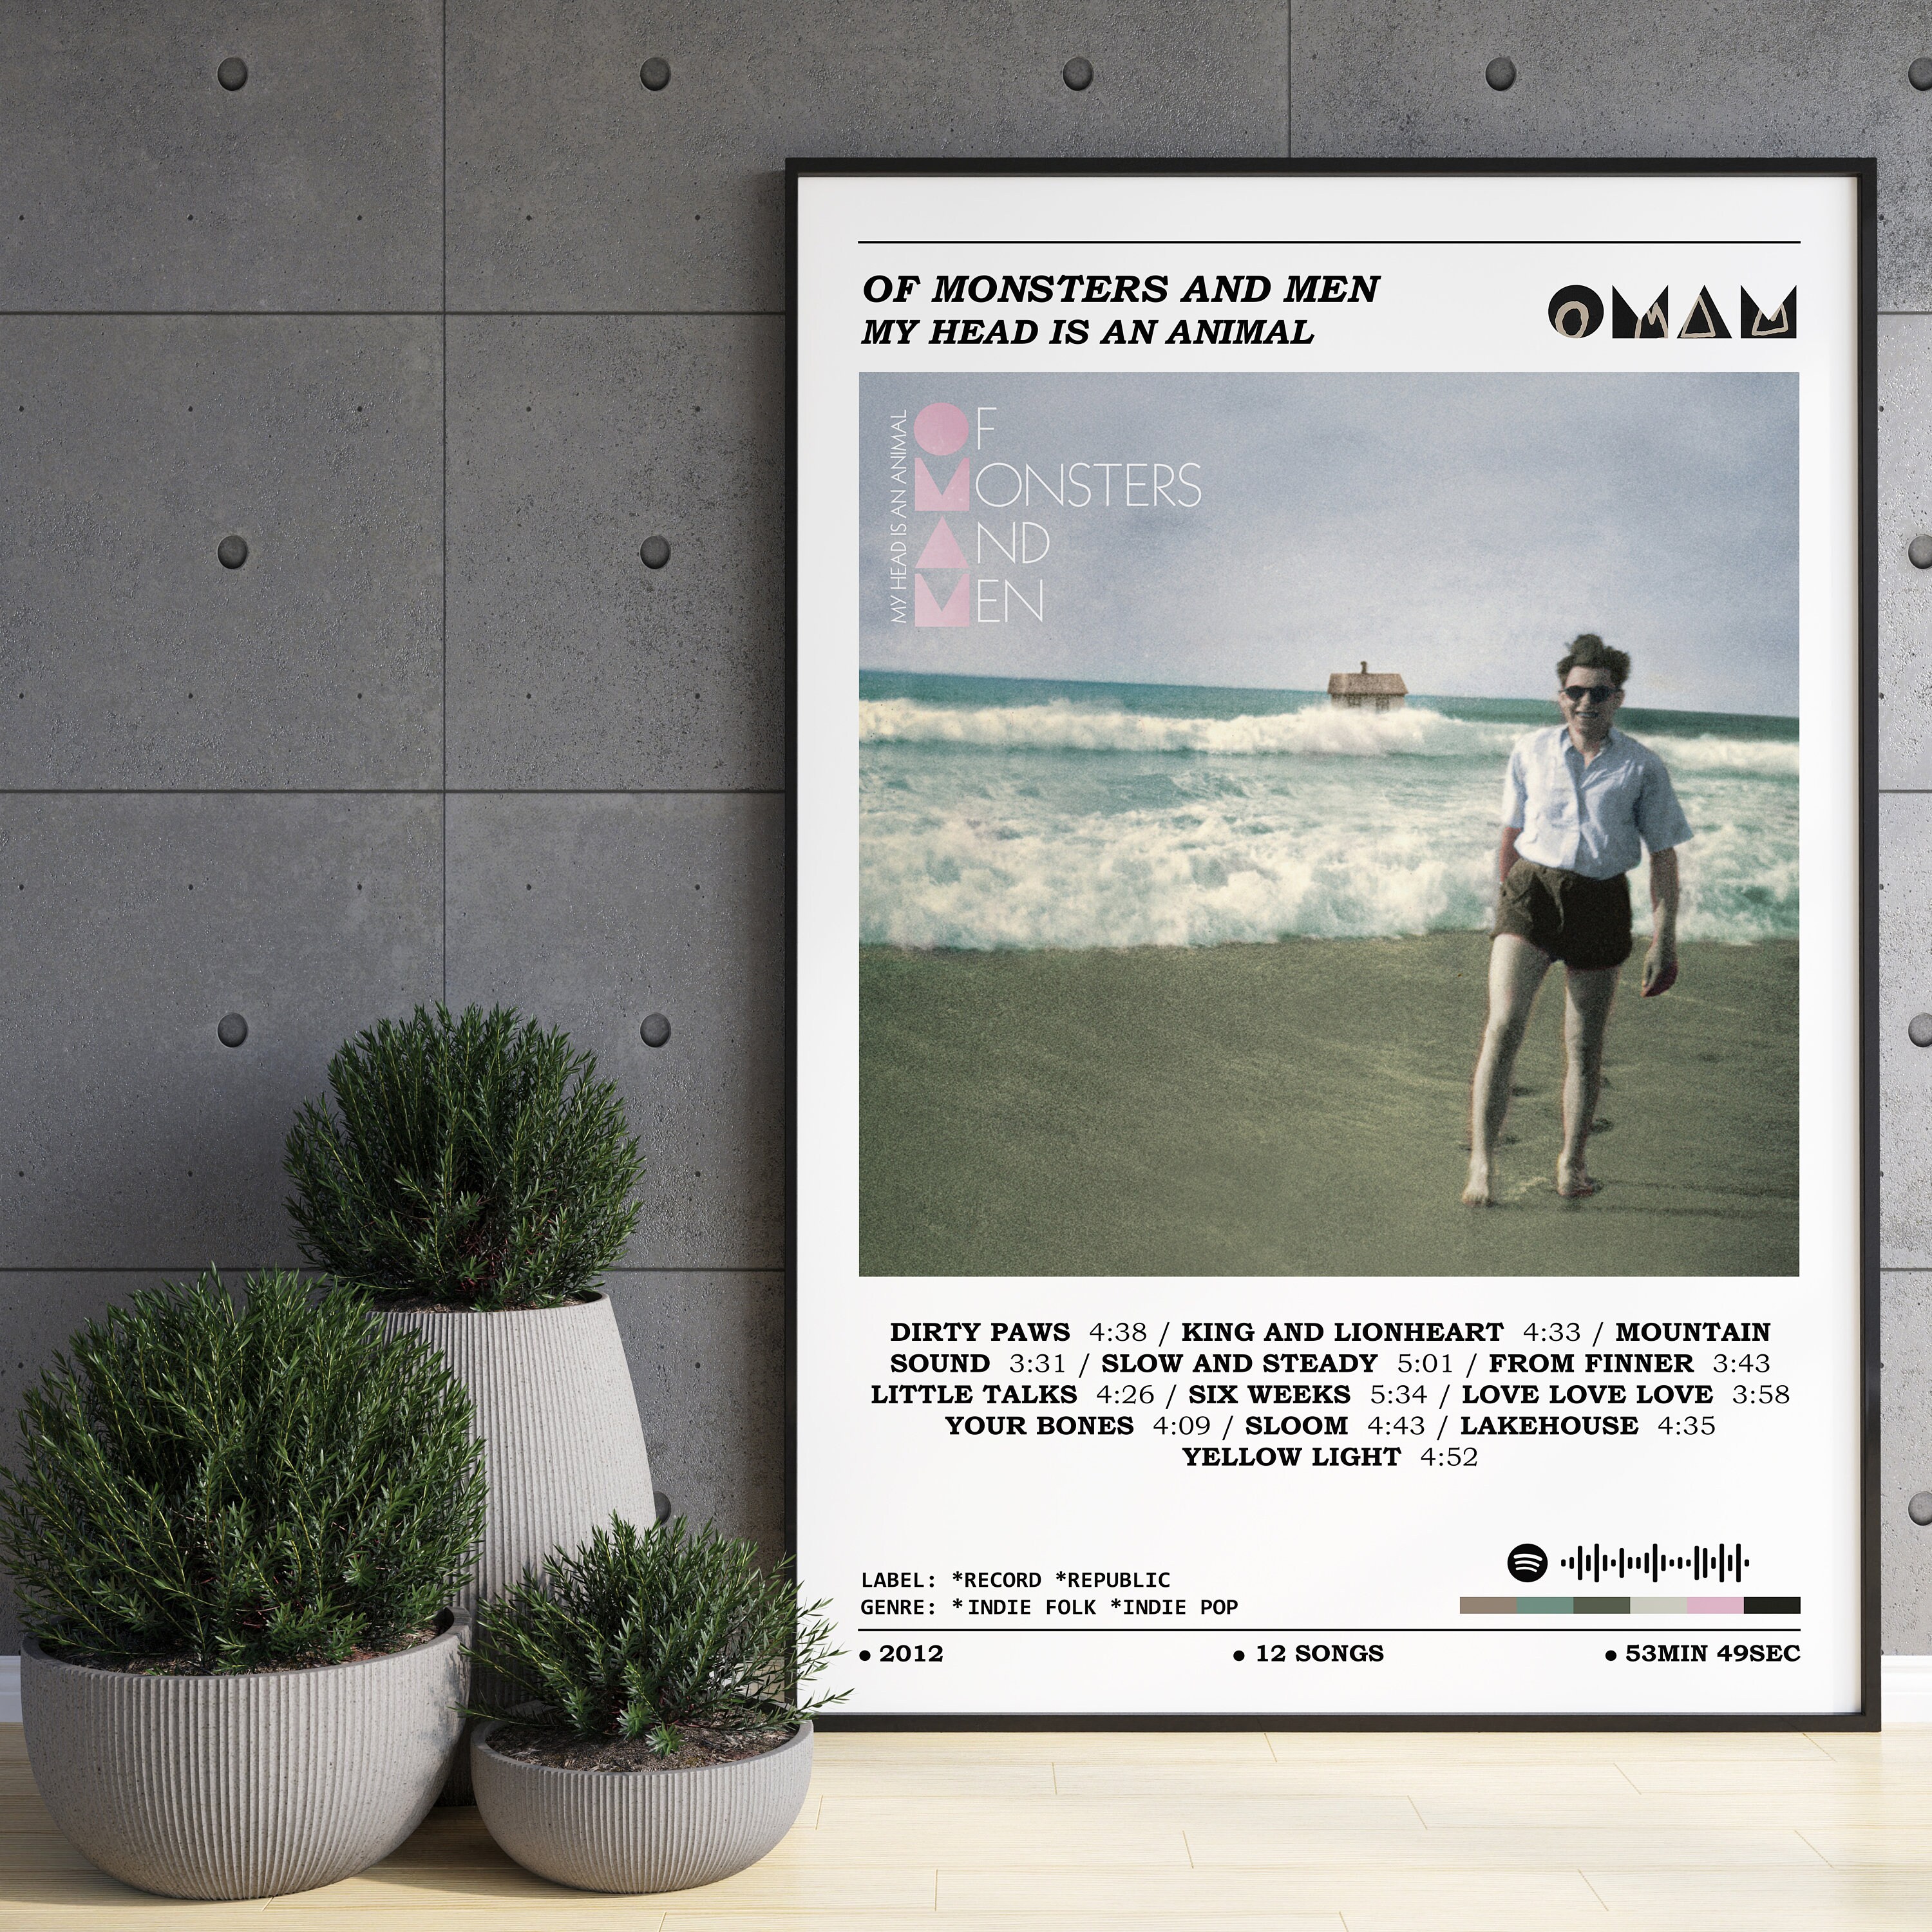 Of Monsters And Men - My Head Is An Animal Album Poster  Of Monsters And Men Poster  Album Cover Poster  Music Print  Home Wall Decor